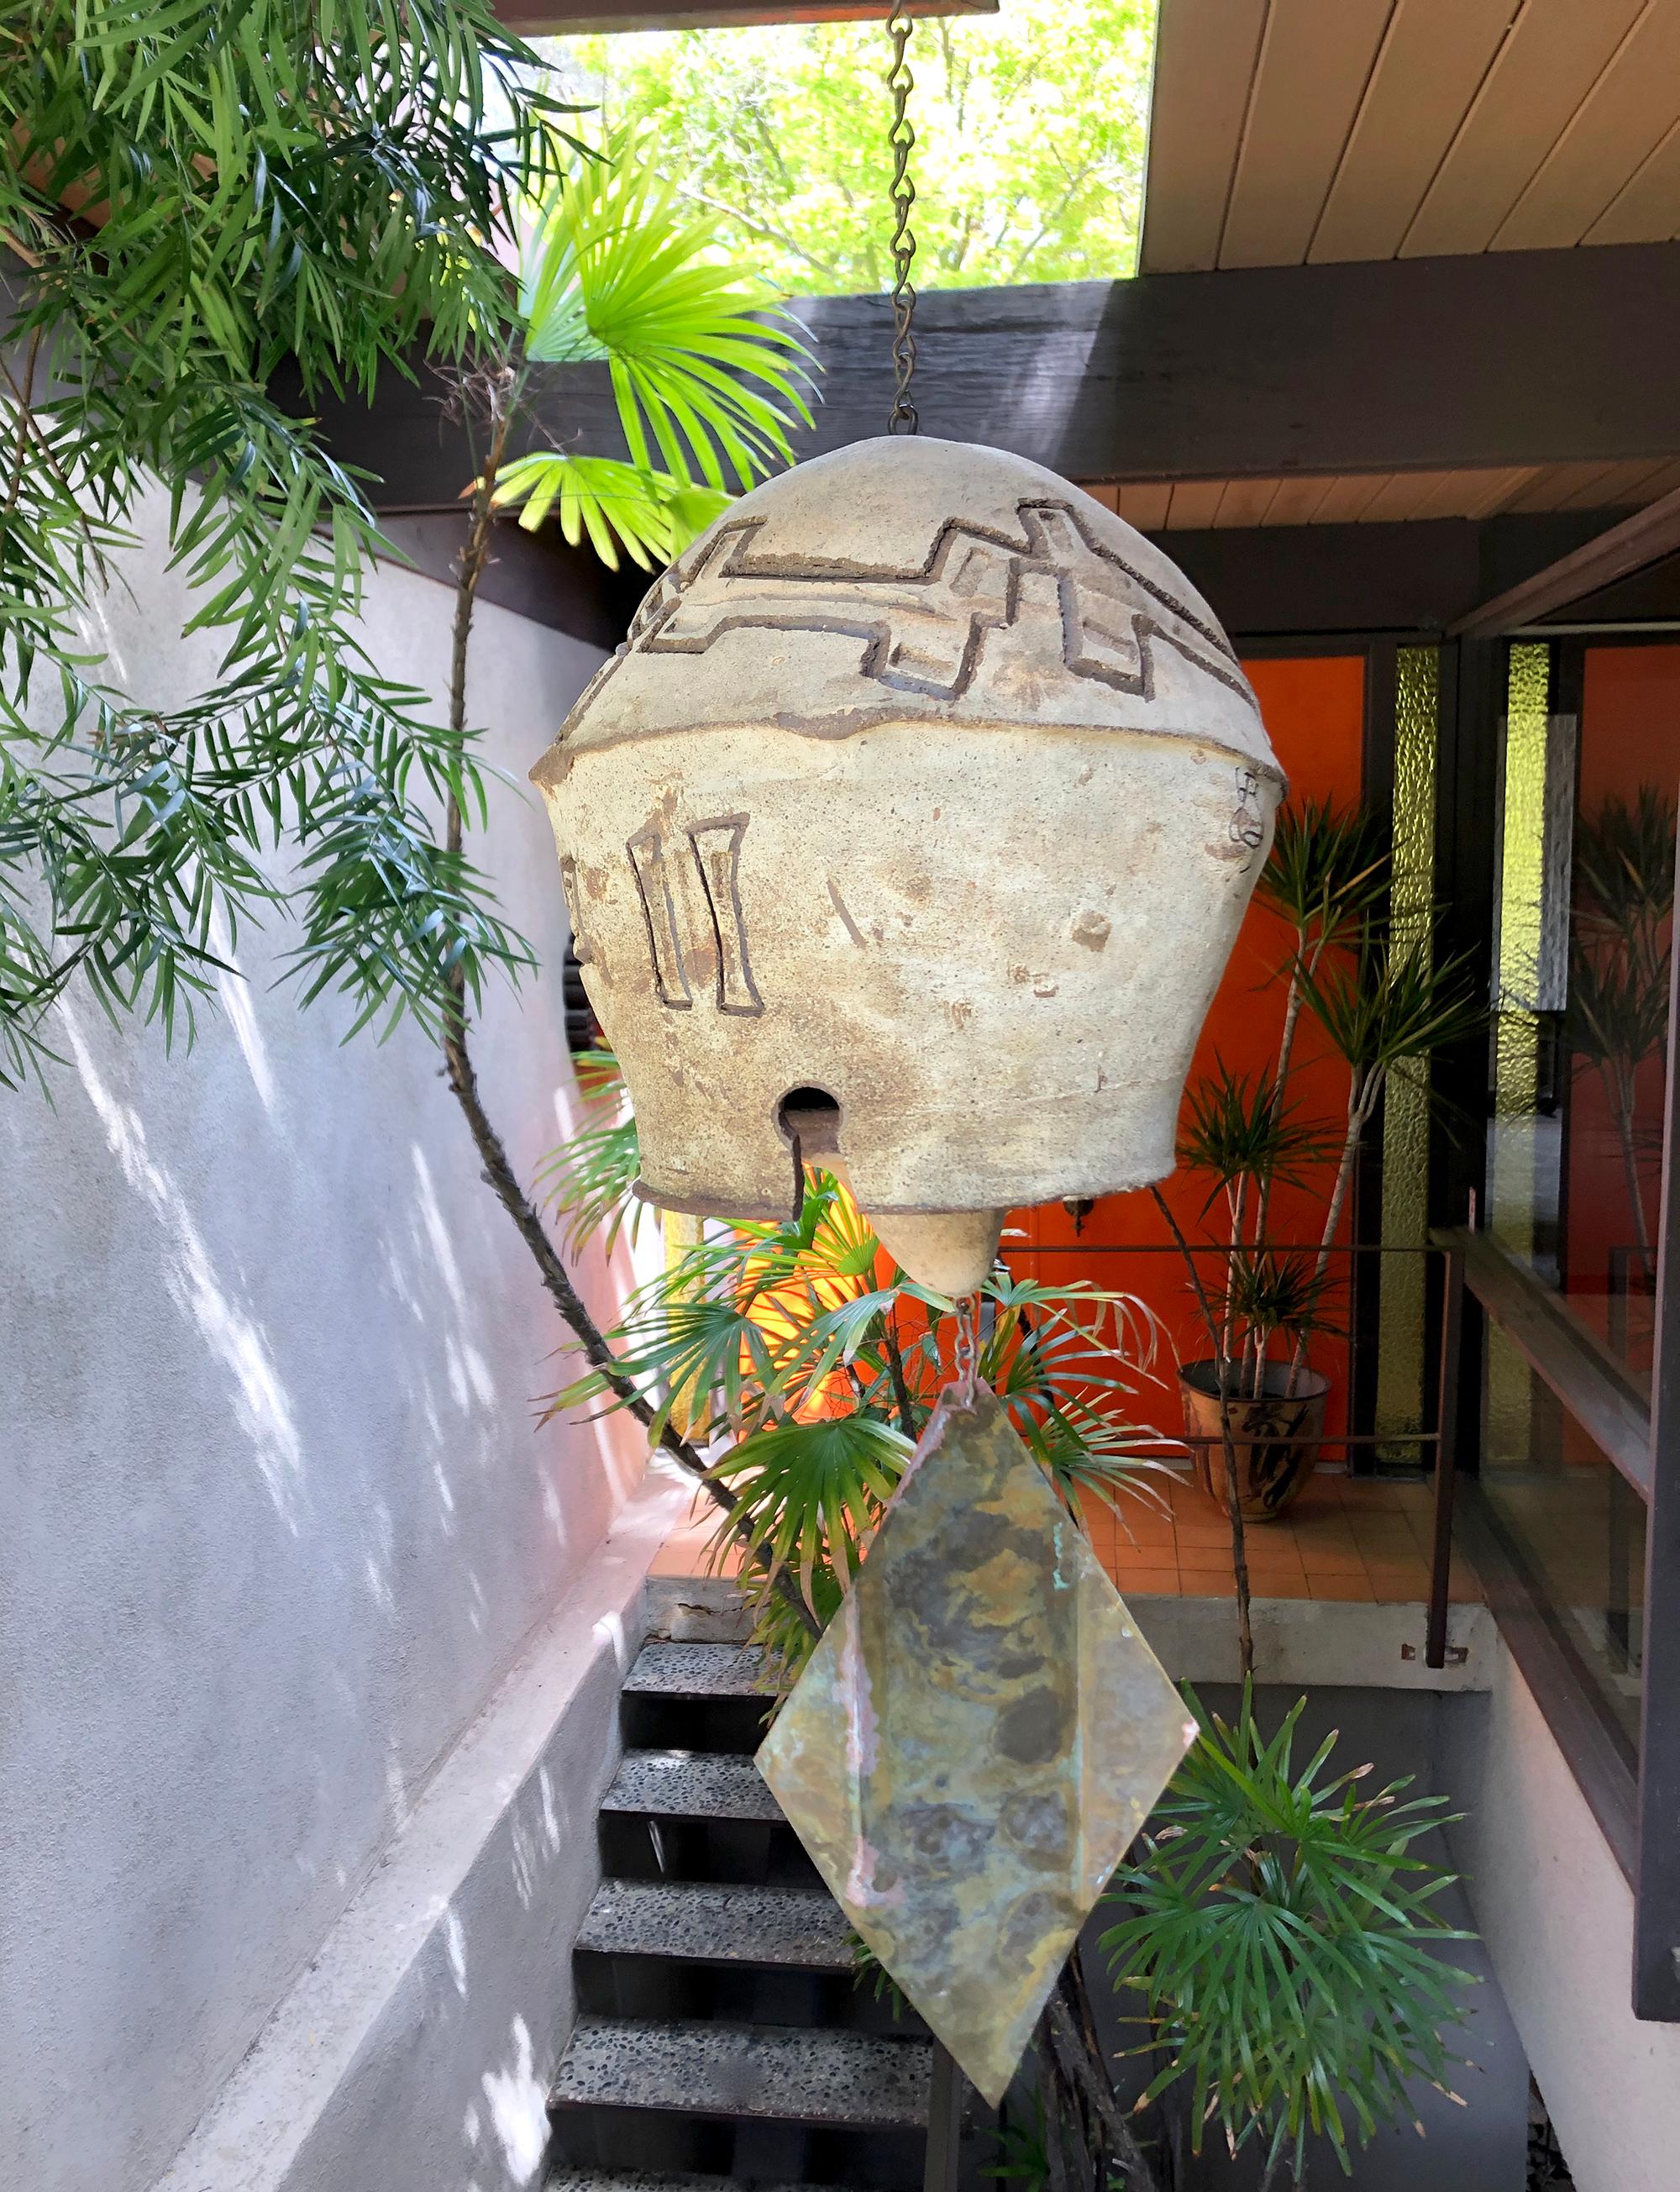 Large ceramic bell created by sculptor and architect Paolo Soleri. Bell measures: 10